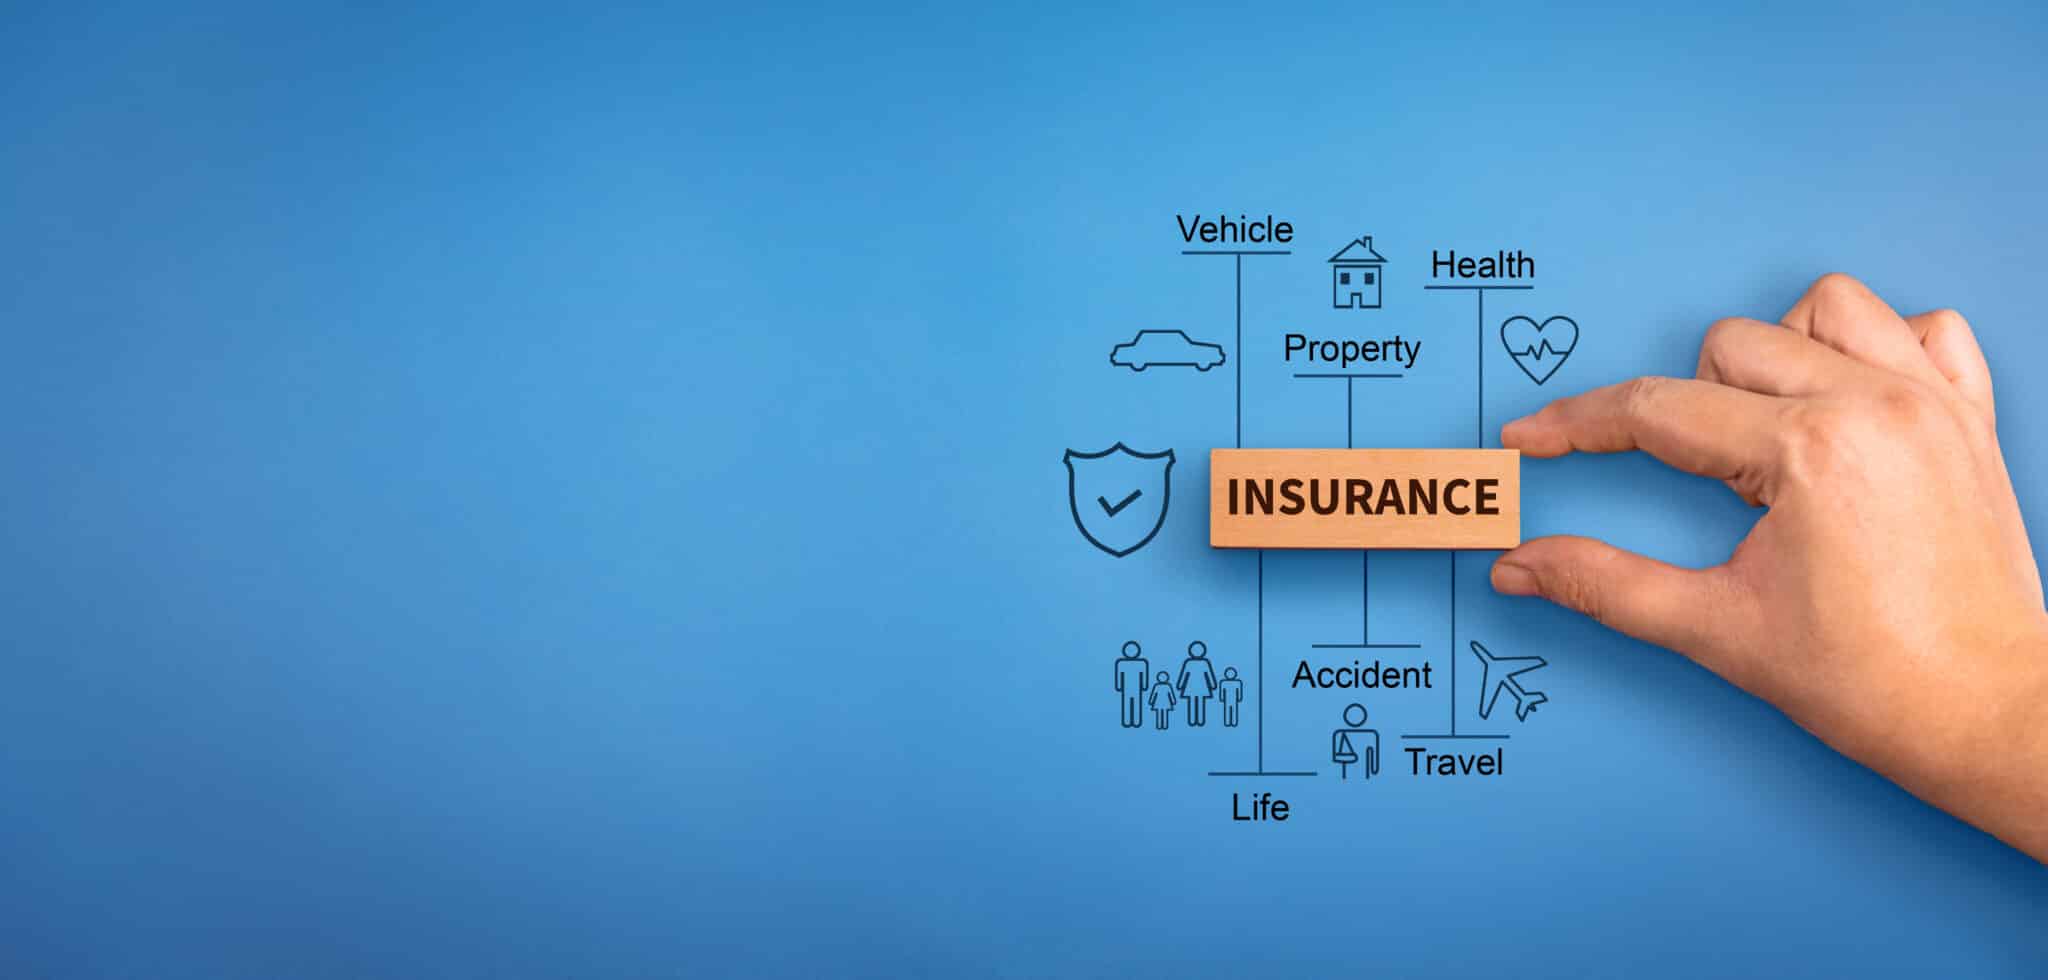 Hand holding a block labeled 'Insurance,' with icons and text for different insurance types.